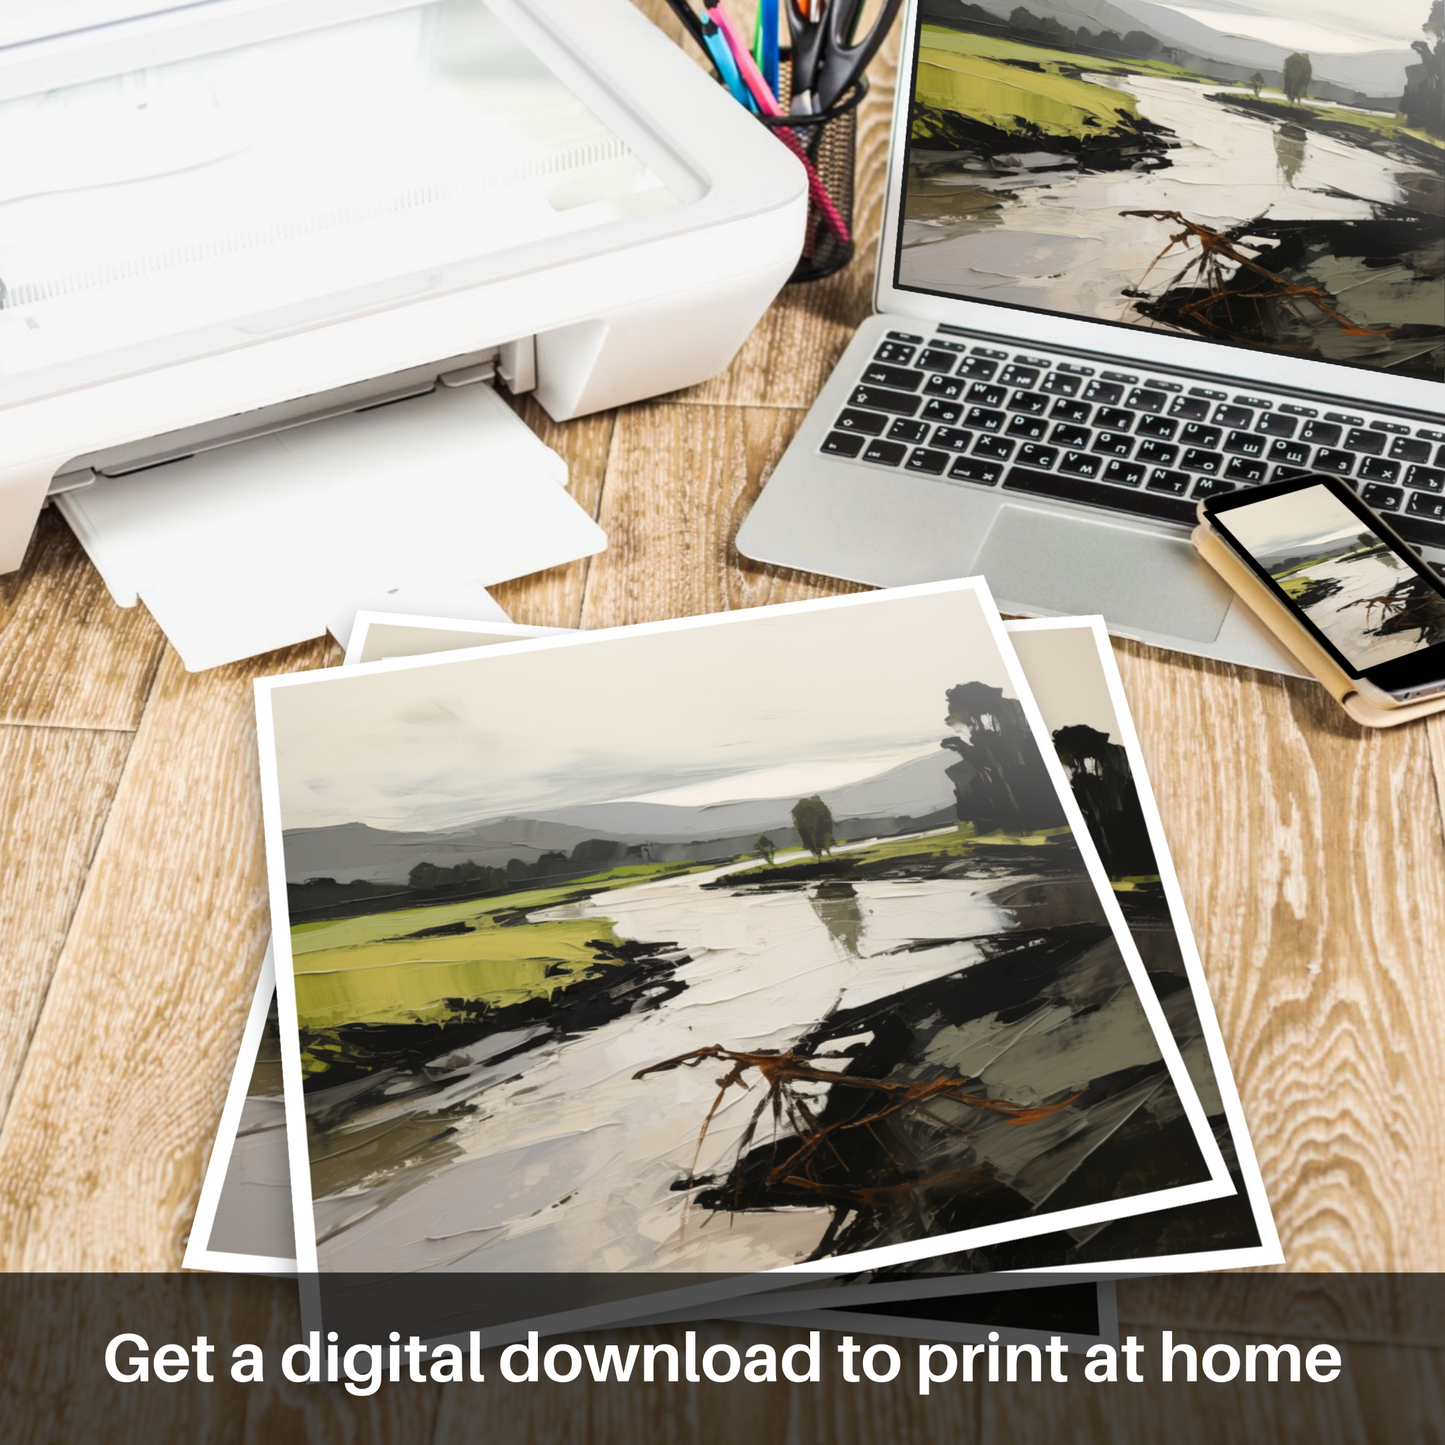 Downloadable and printable picture of River Leven, West Dunbartonshire